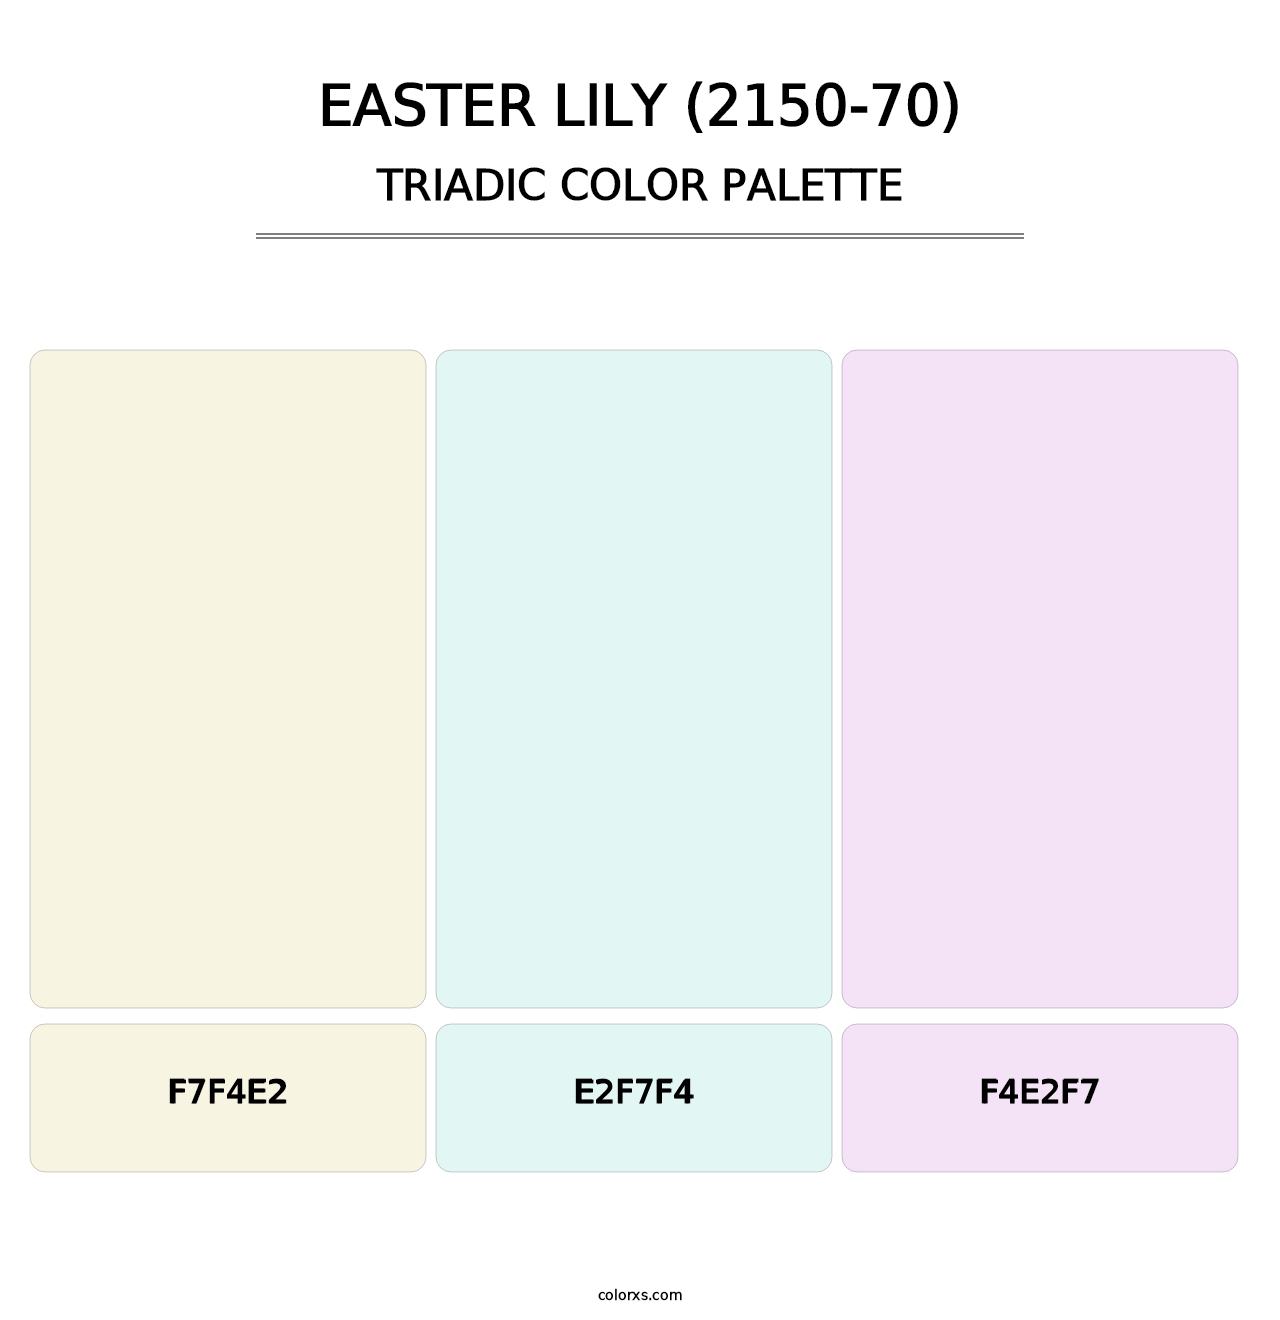 Easter Lily (2150-70) - Triadic Color Palette